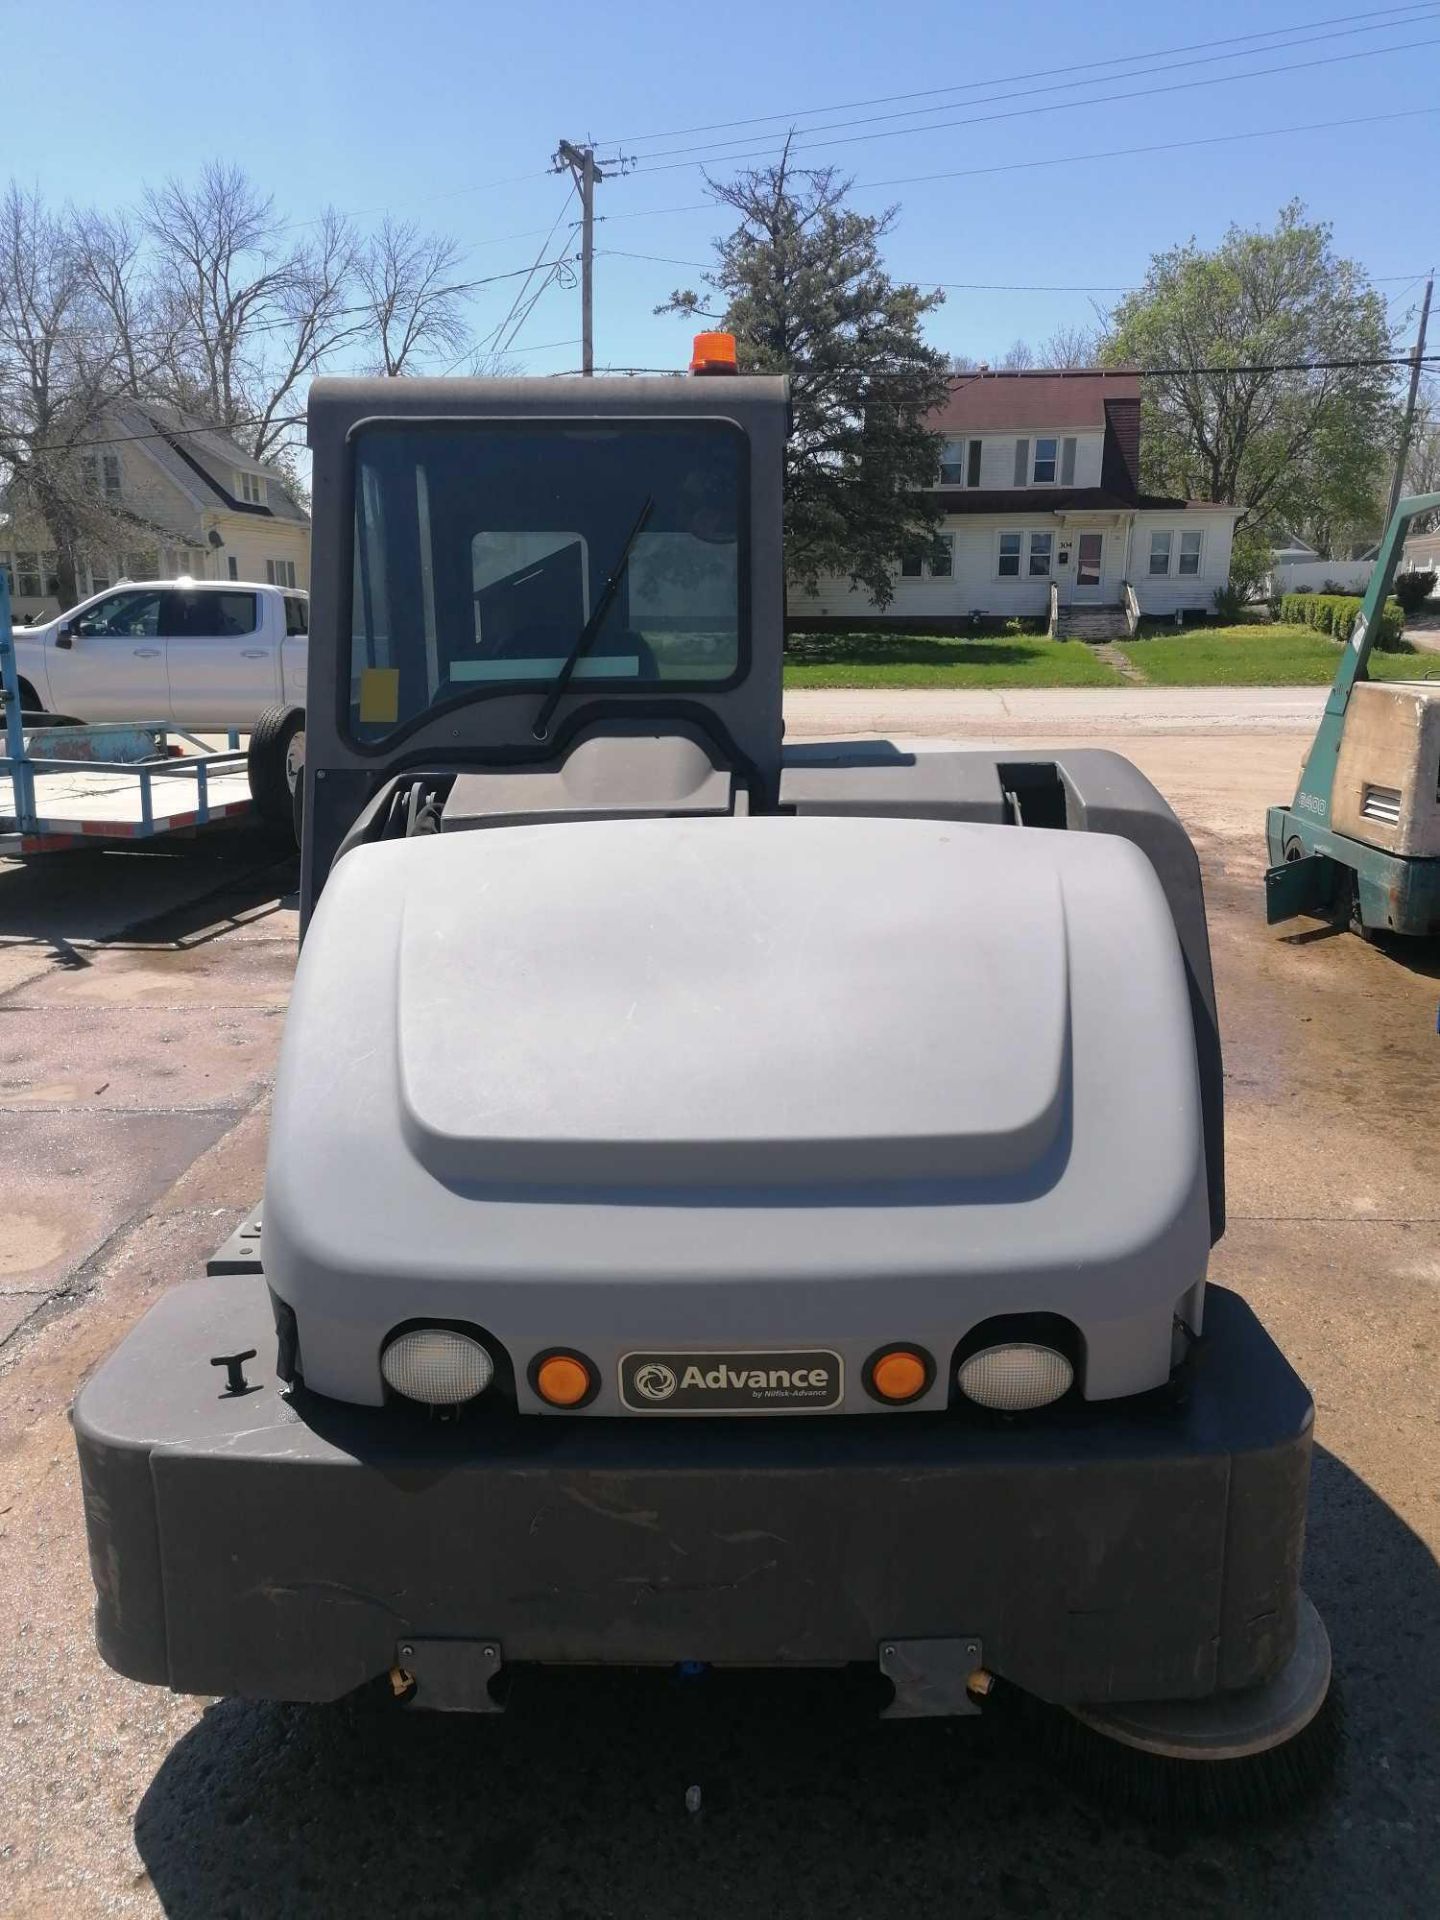 Exterra 6340 Floor Sweeper, Serial # 2037437, Model 6340, Propane. Located at 301 E Henry Street, - Image 16 of 16